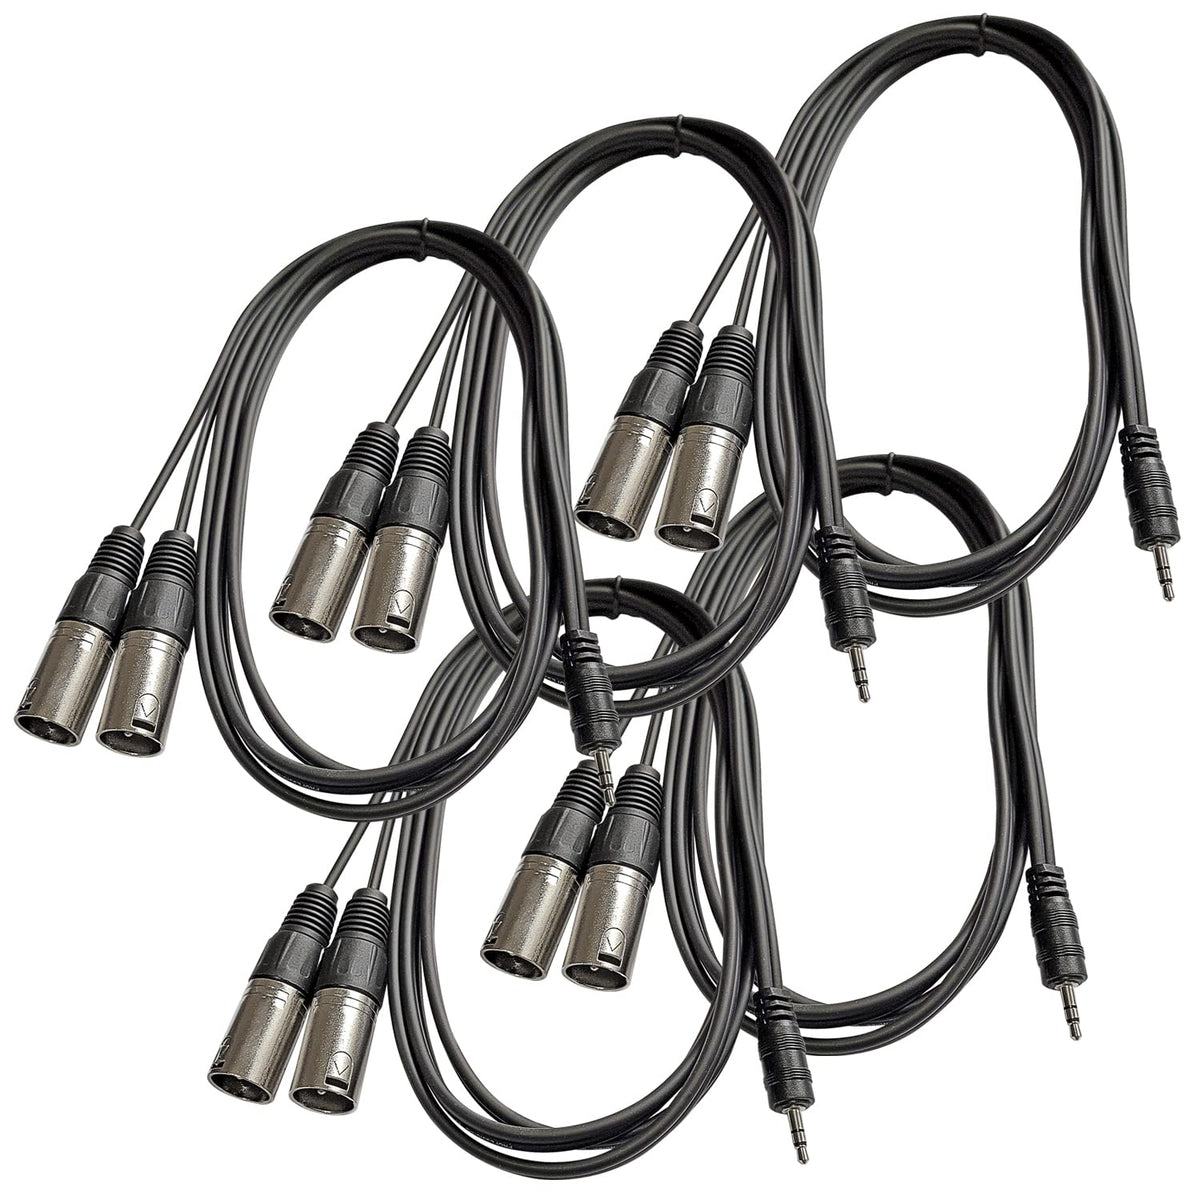 AxcessAbles TRS18-DXLR402M Audio Cable, 3.5 mm Stereo TRS to Dual XLR Male Cable (6.5ft)  5PK